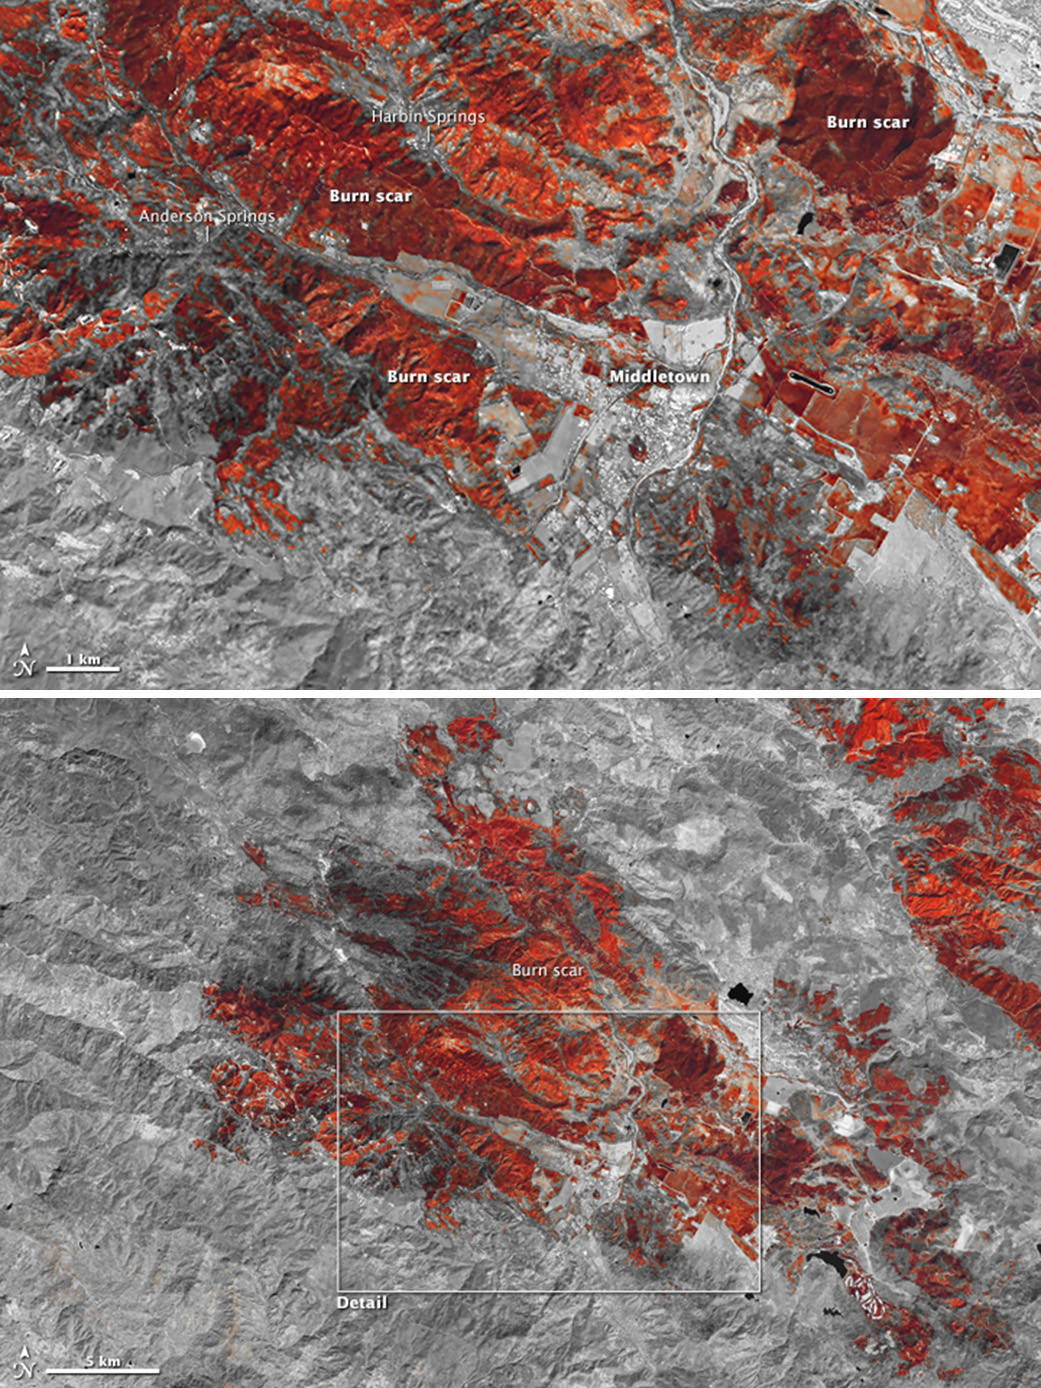 Showing wildfire scars in Calfornia using the Landsat satellite